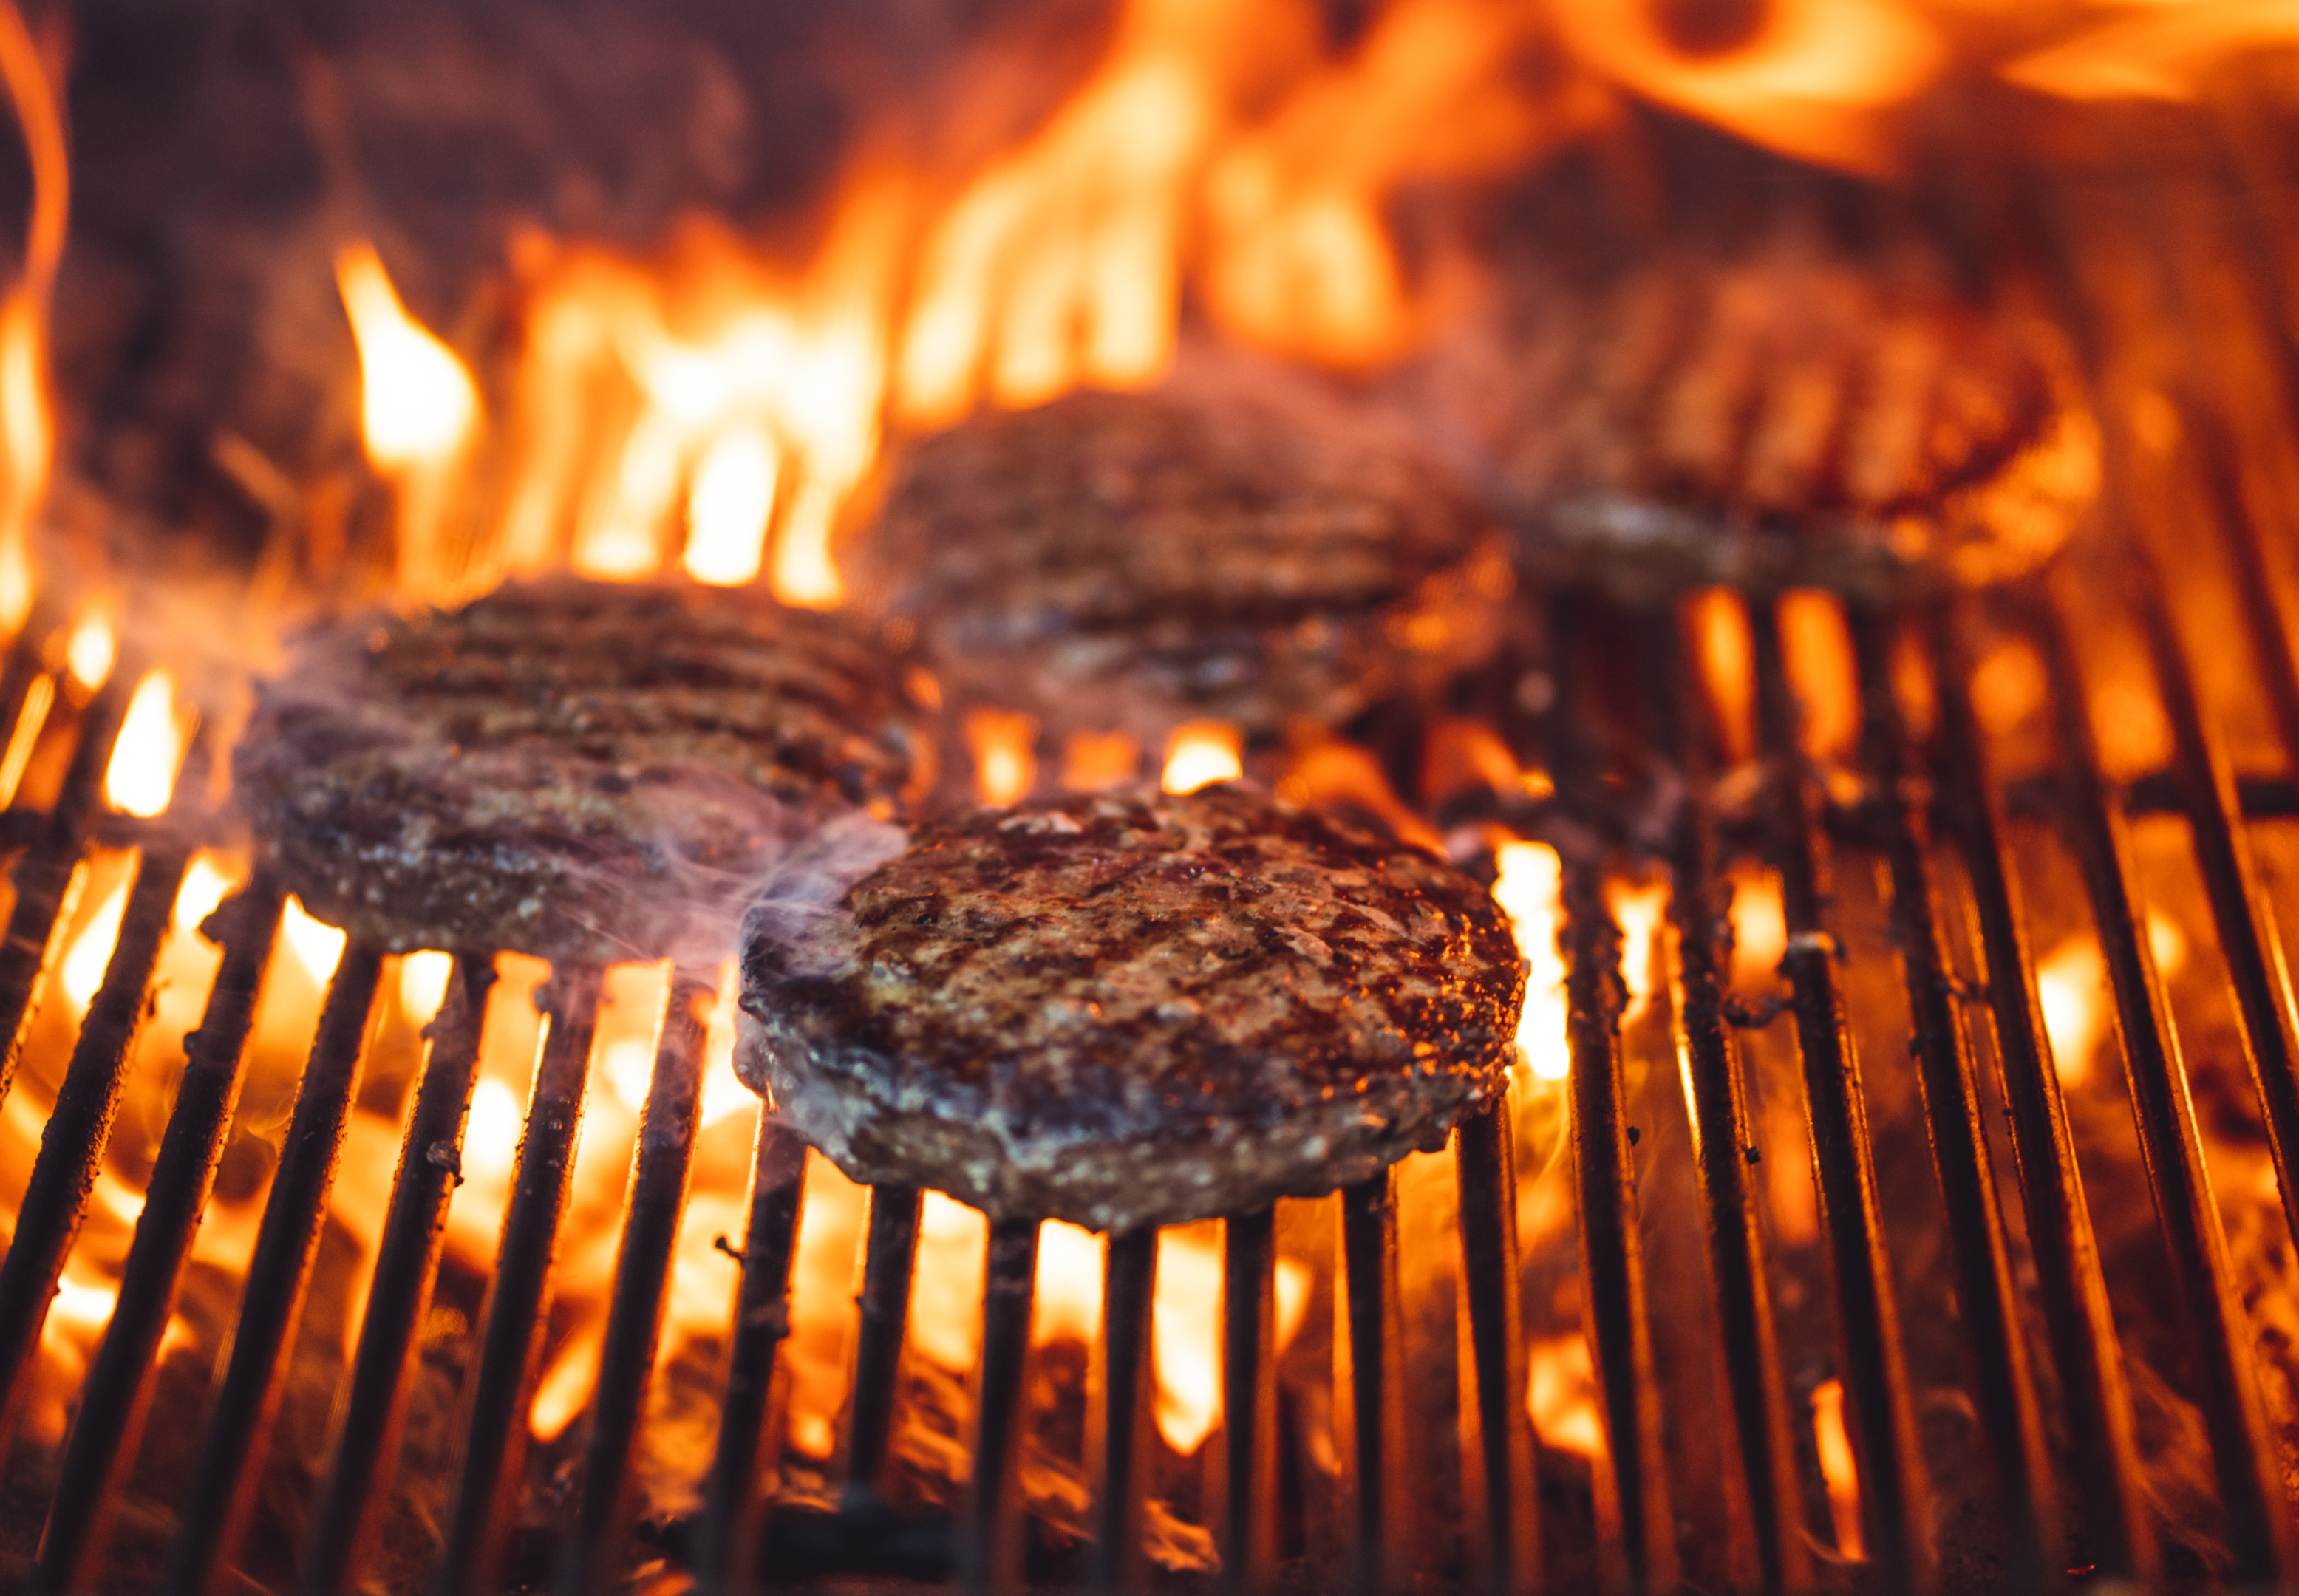 For juicy burgers, sear the patties on a high heat barbecue.